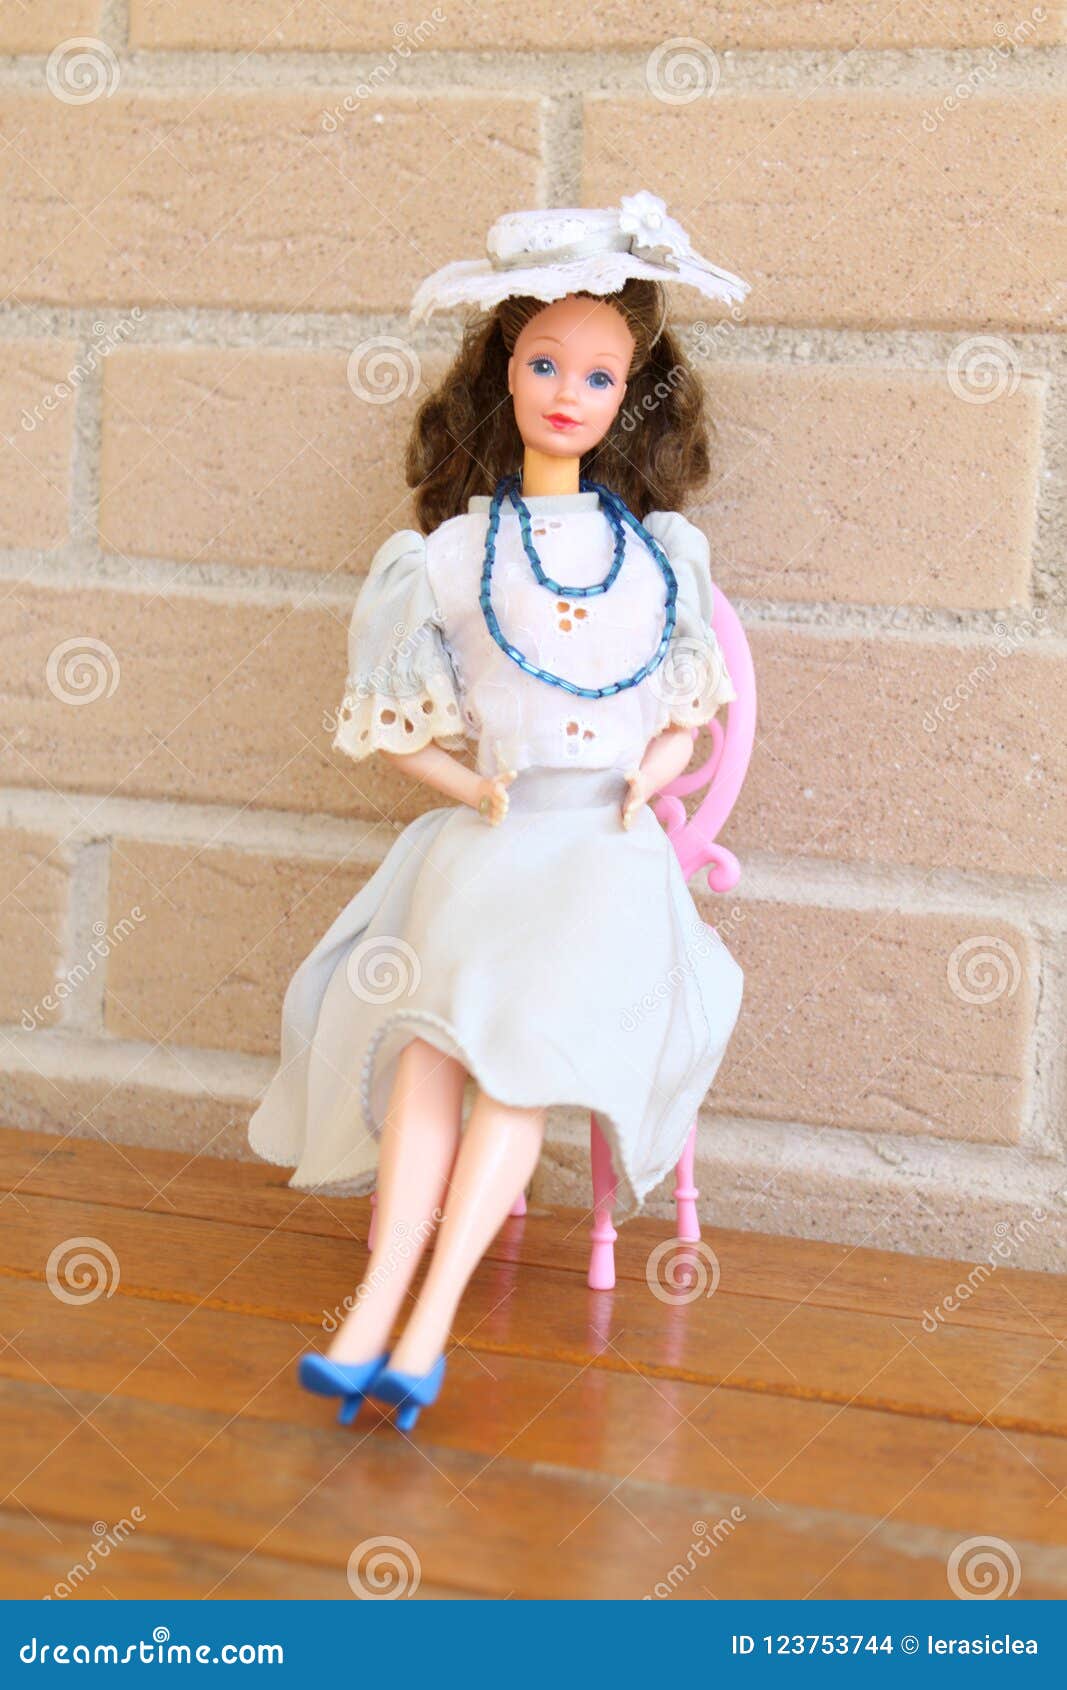 One Old Barbie Doll Whit 80s And 90s Outfits Editorial Stock Image